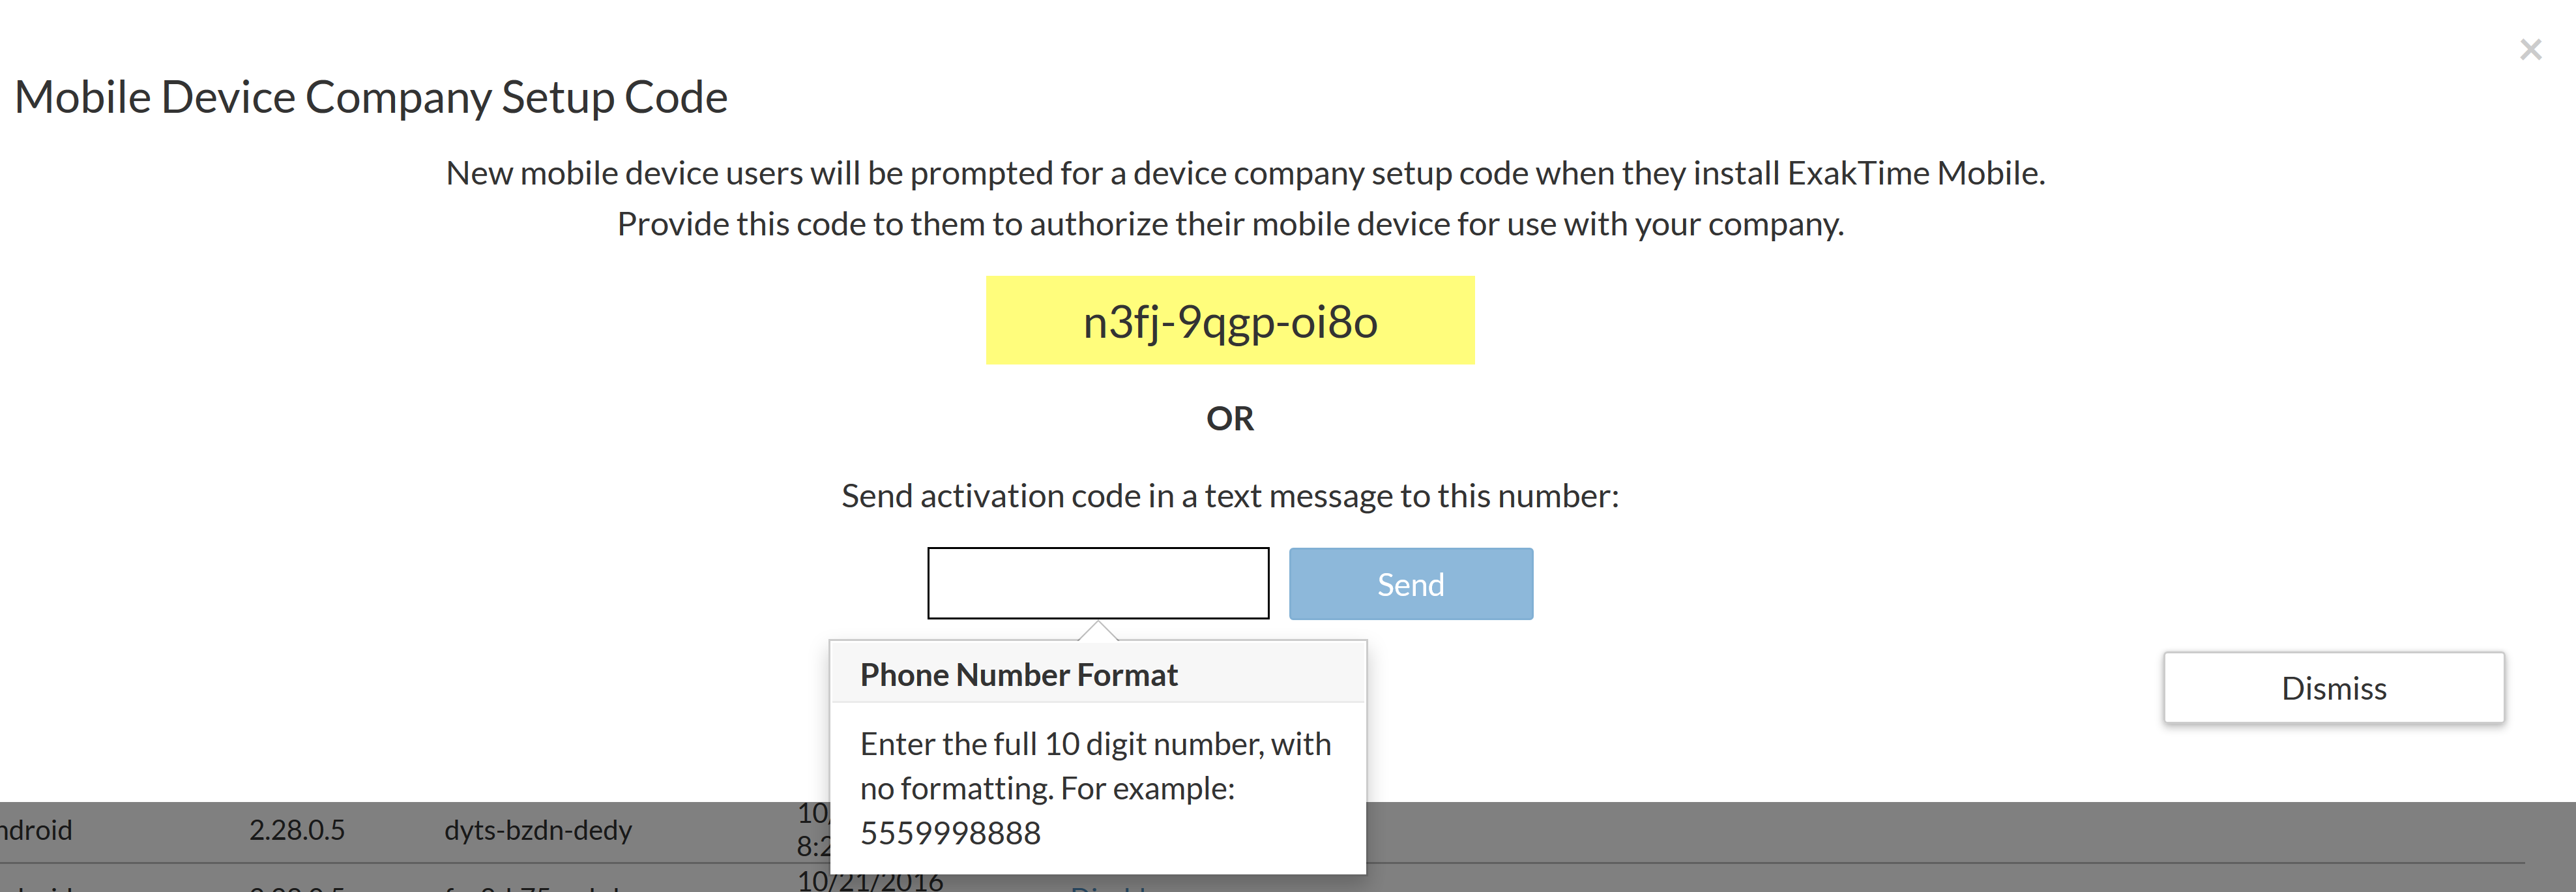 Quick_Start_Guide__115005300728__Add-Mobile-Device.png